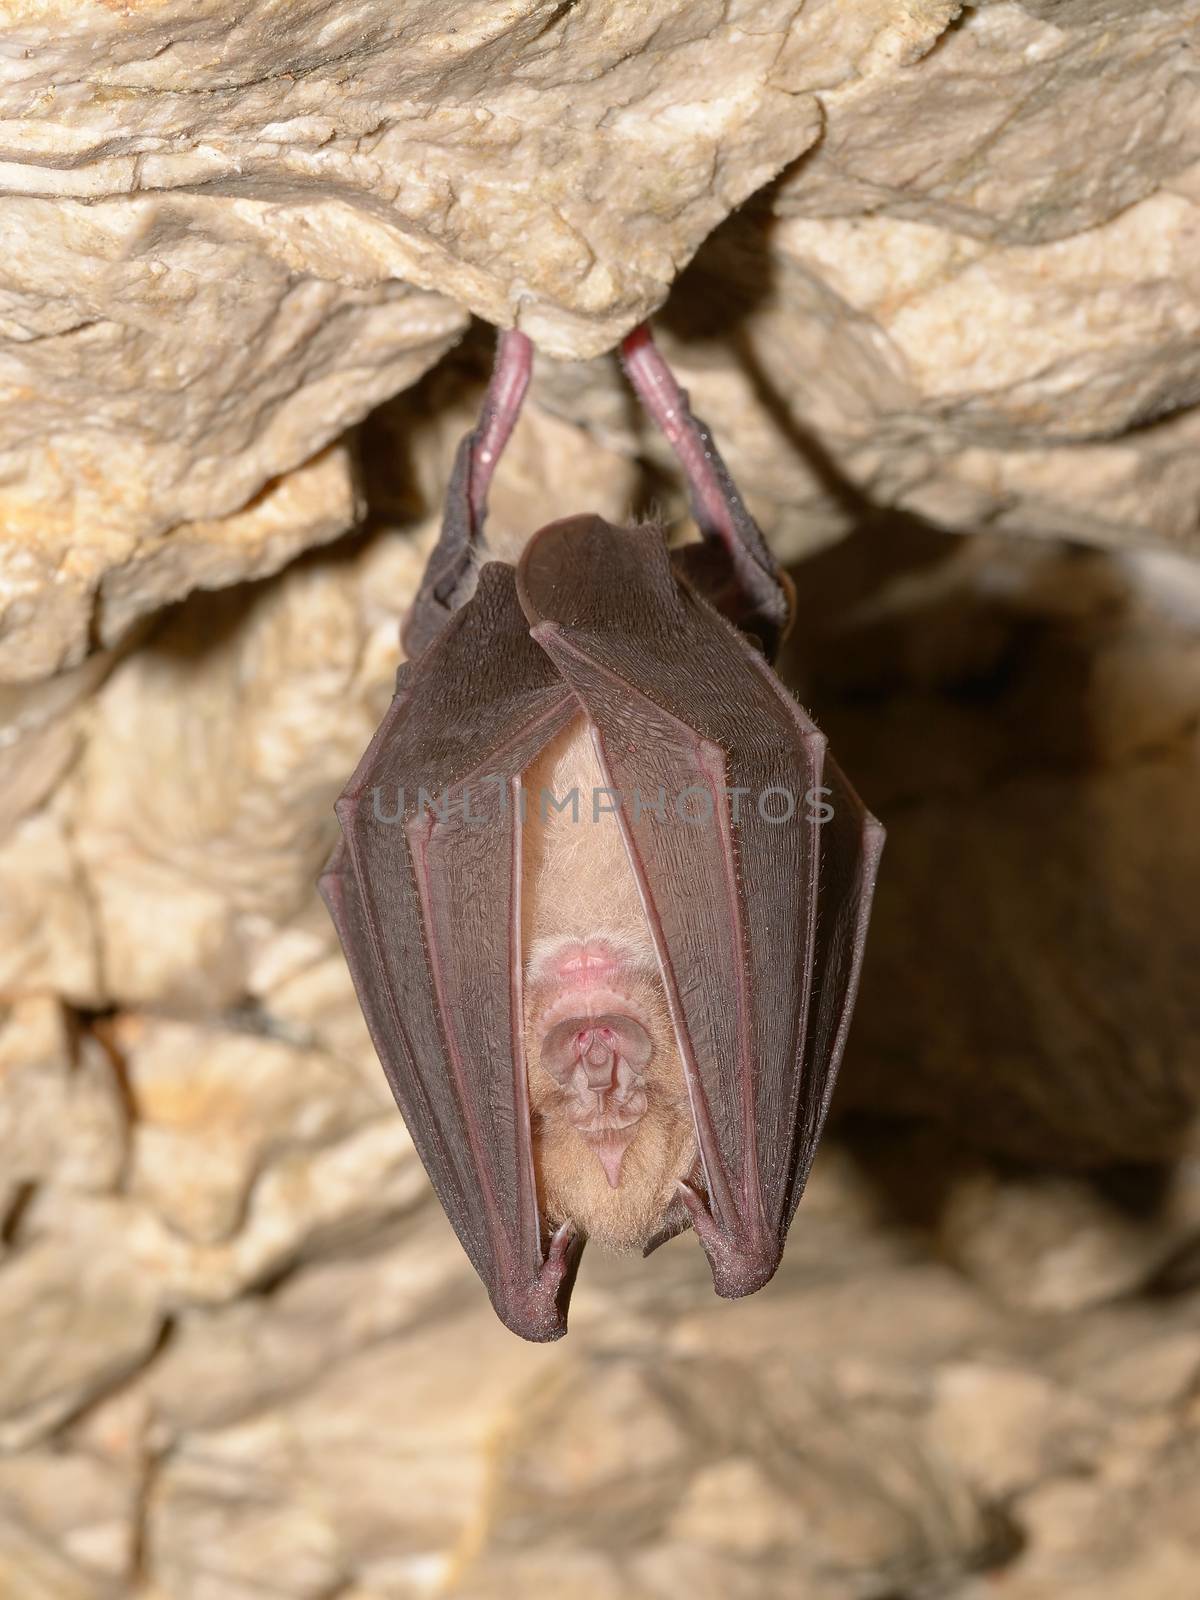 Greater horseshoe bat by comet